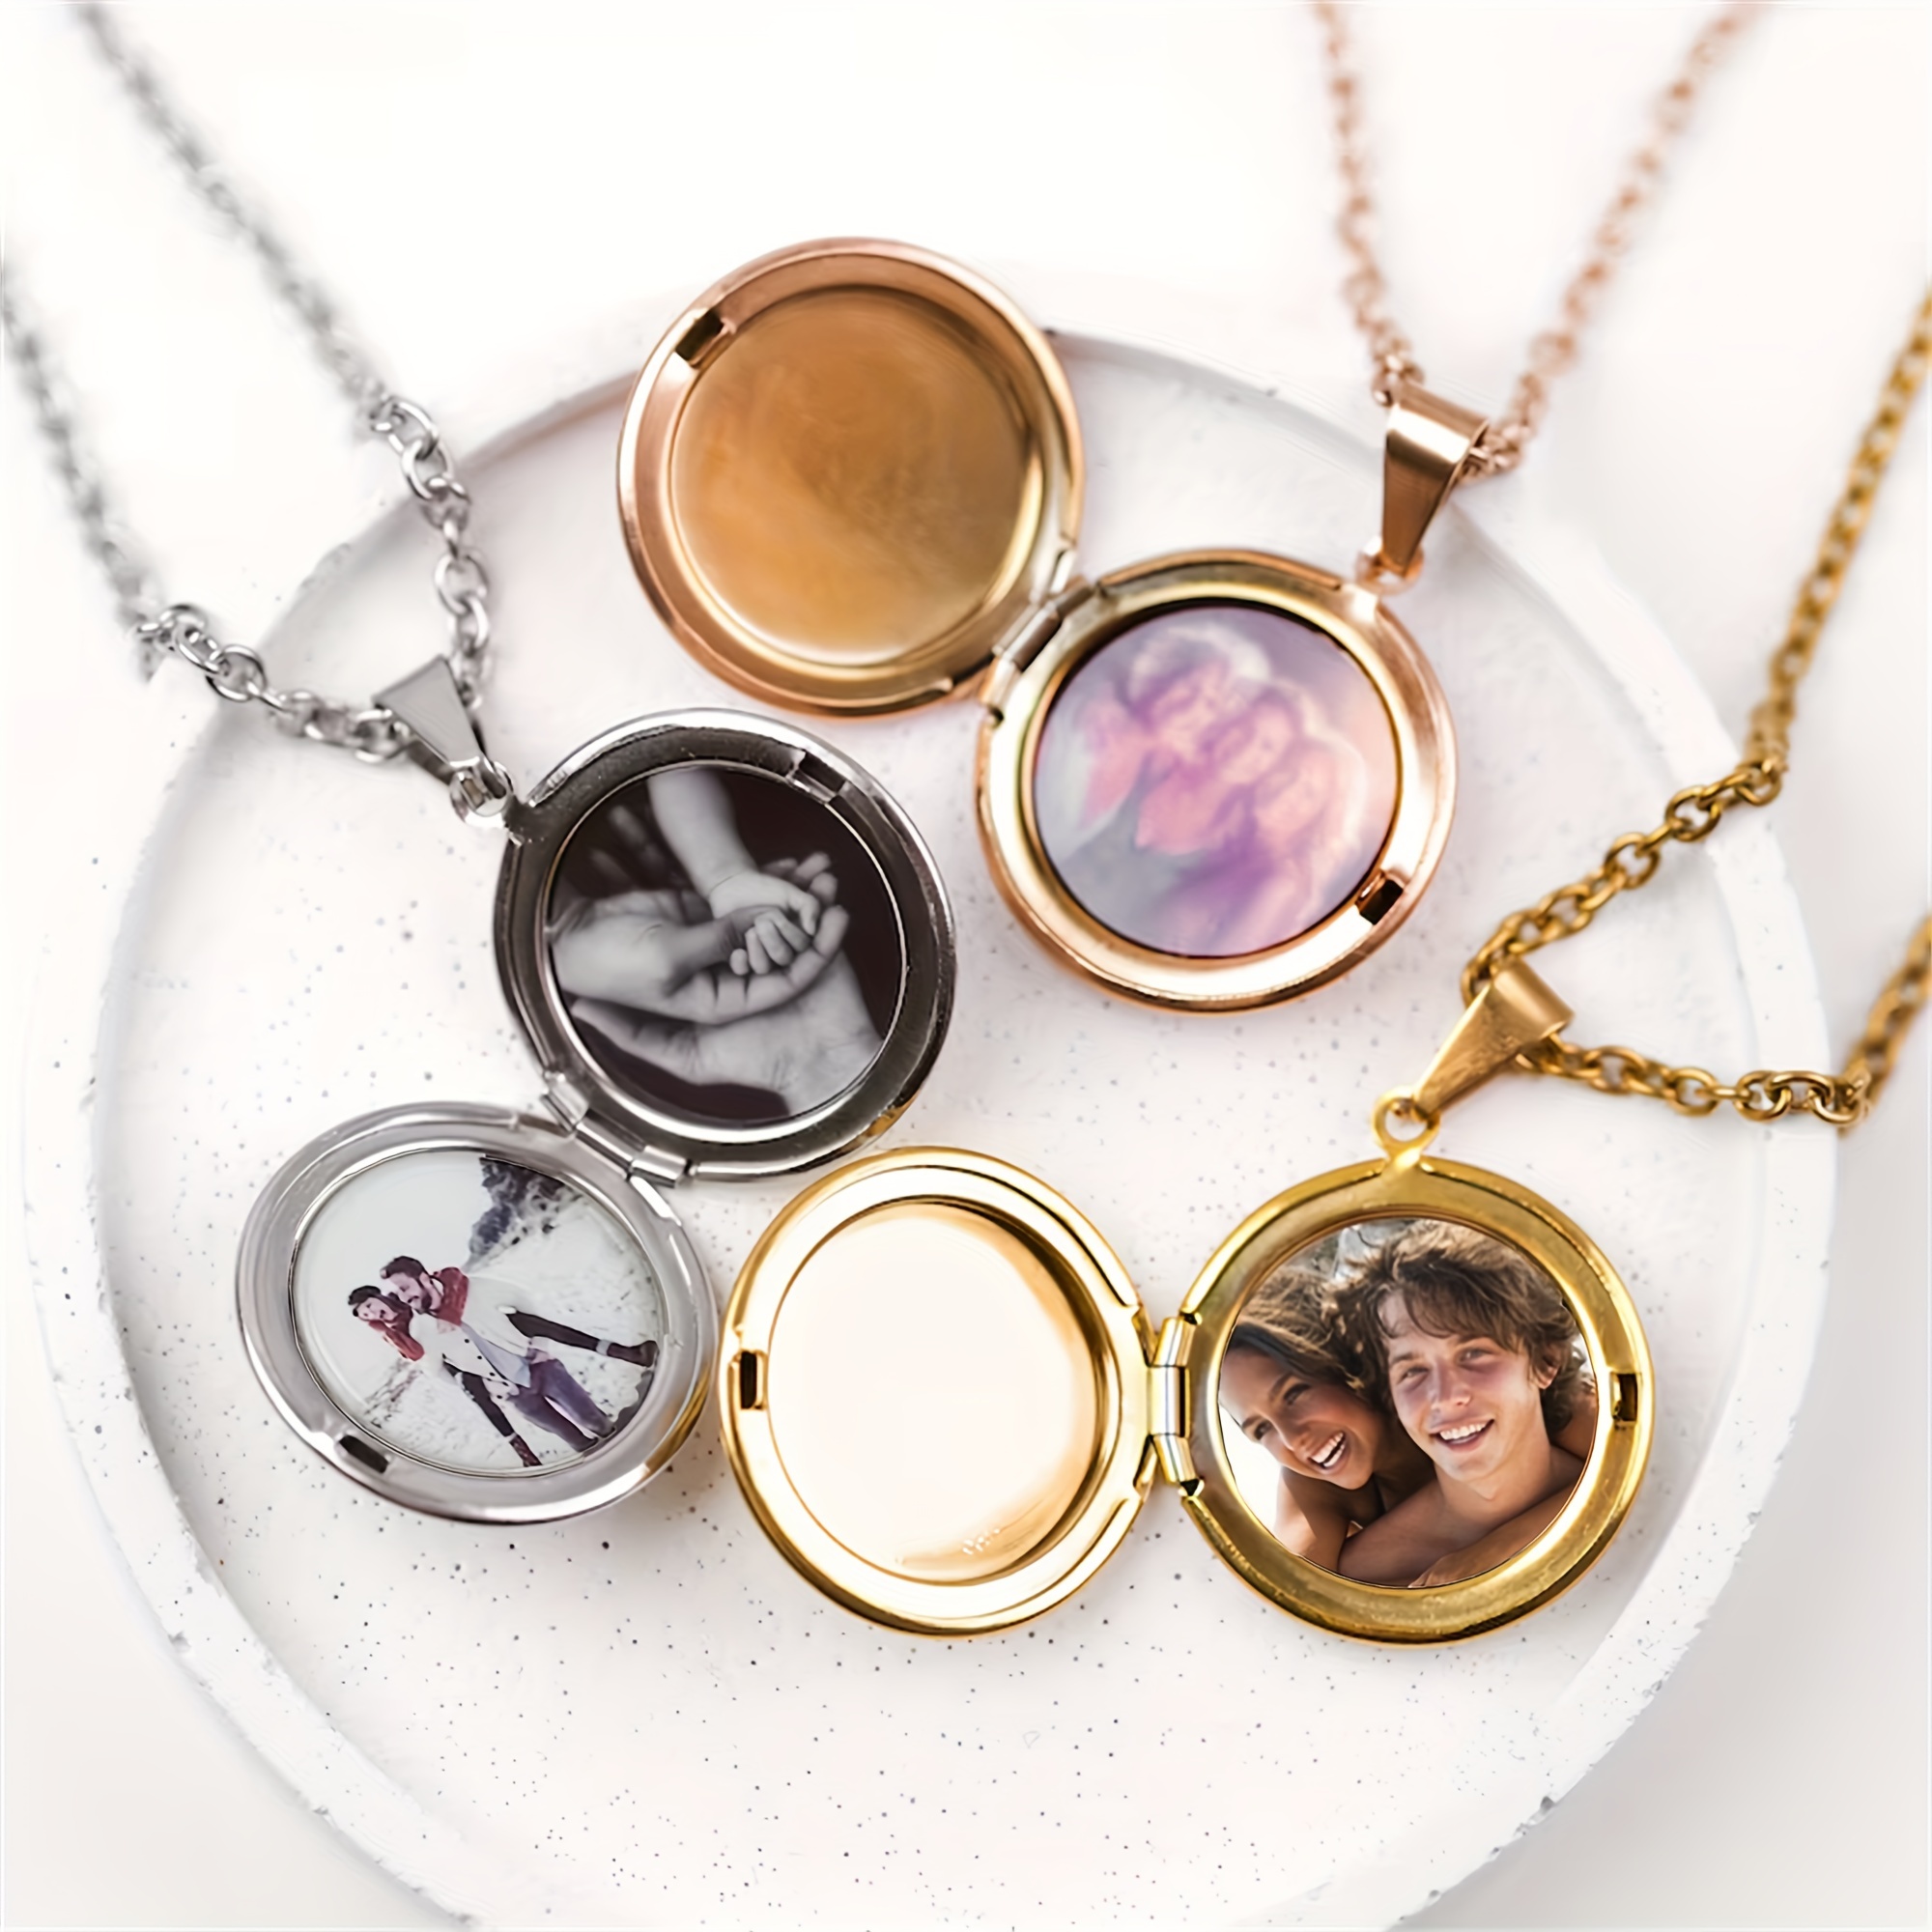 

Customized Photo Locket Necklace, Personalized Picture Elegant Jewelry, Minimalist Style, Romantic Keepsake, Mother's Day Gift, Anniversary Present